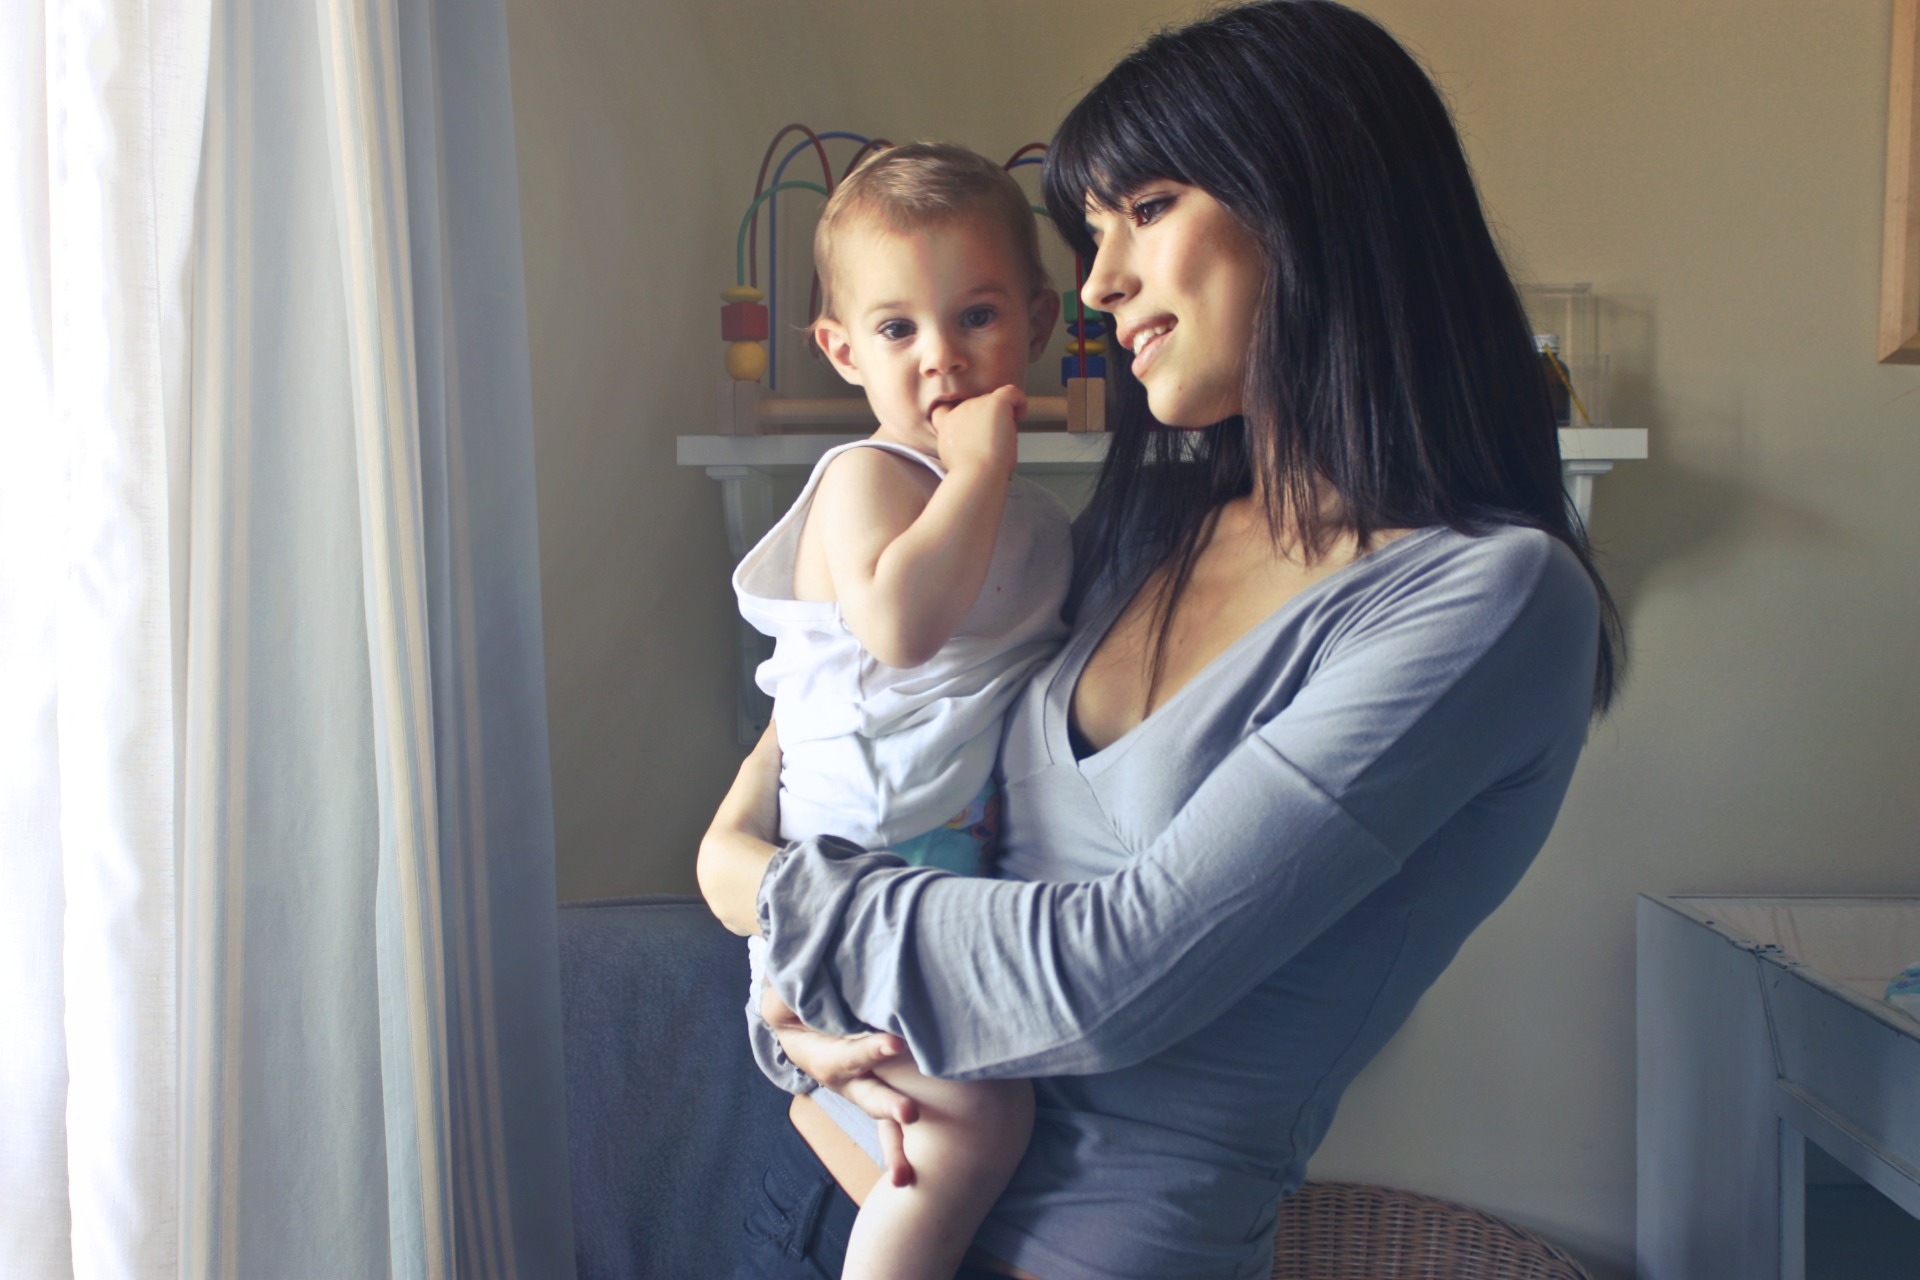 A woman holding a baby, looking out the window.